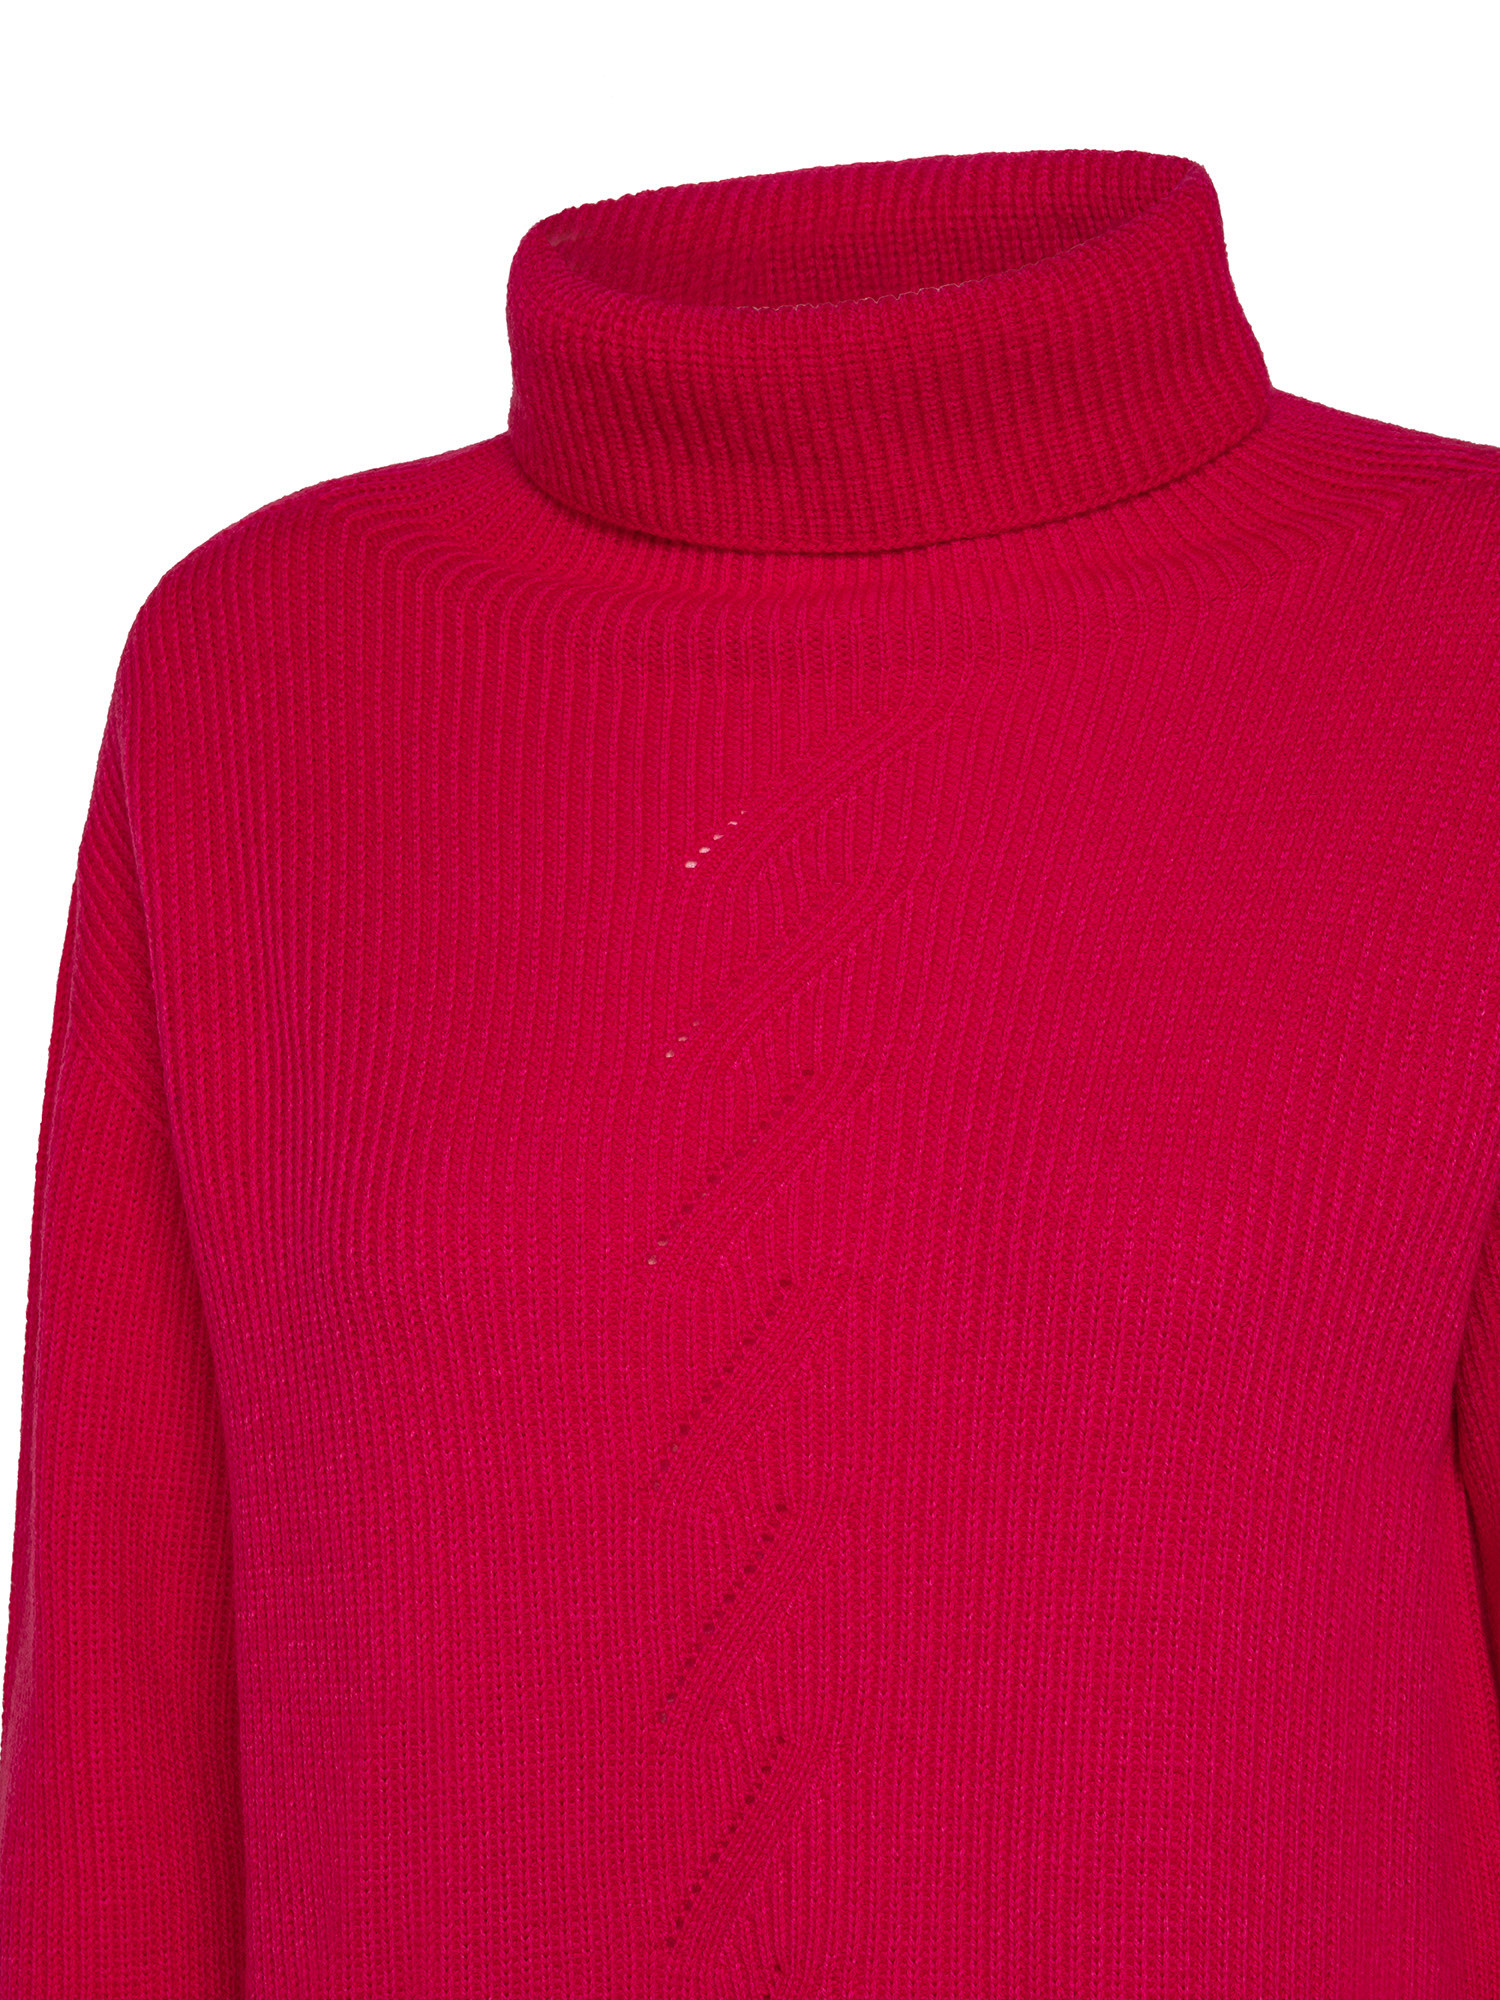 K Collection - Turtleneck pullover in extrafine wool, Pink Fuchsia, large image number 2